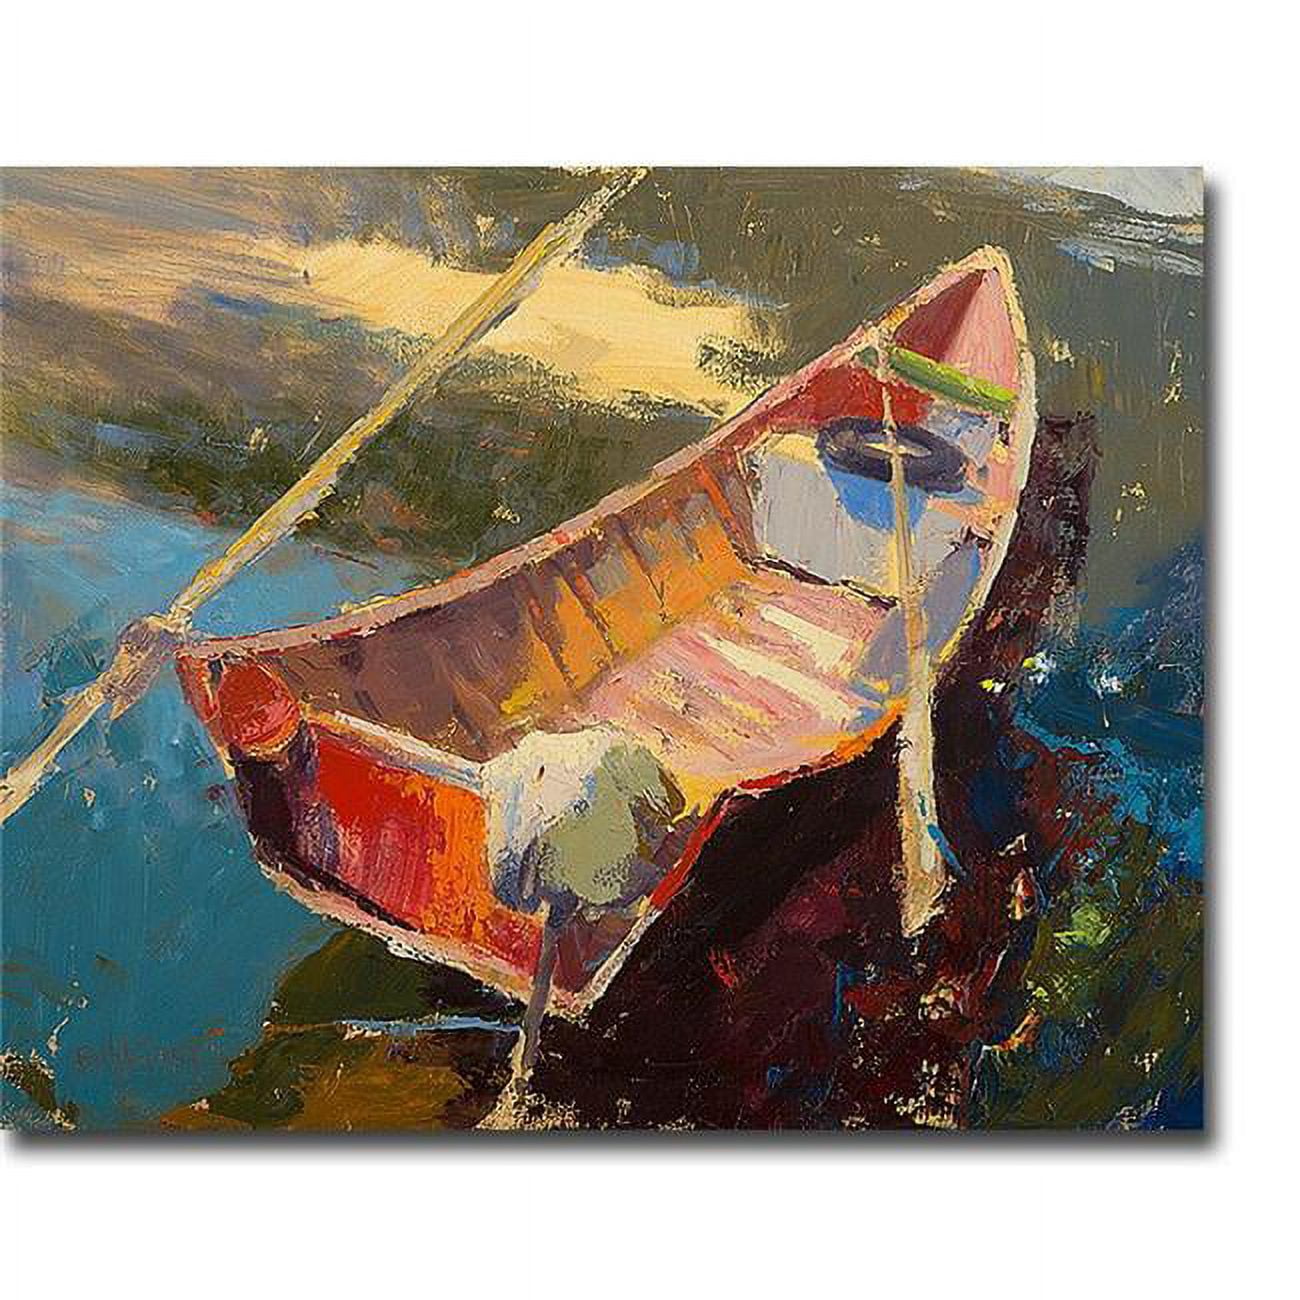 1620m944ig Italian Wayfarer By Beth A Forst Premium Gallery-wrapped Canvas Giclee Art - Ready-to-hang, 16 X 20 X 1.5 In.